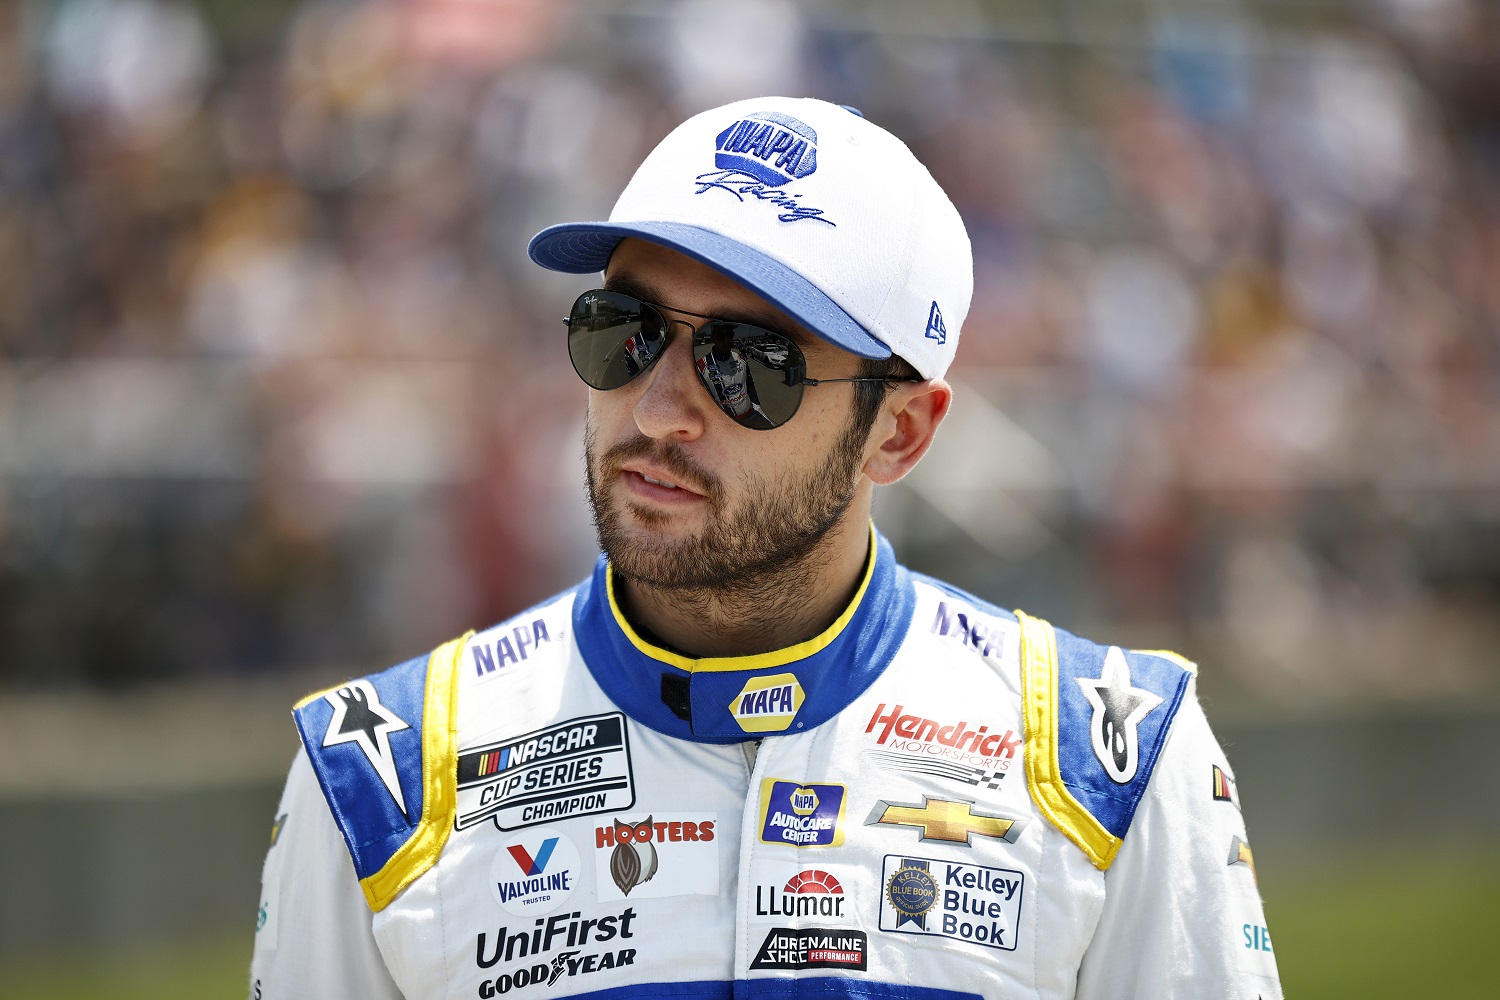 Chase Elliott, an accomplished road-course racer, won the NASCAR Cup Series race at Road America on July 4, 2021, in Elkhart Lake, Wisconsin, for his 13th career victory. | Jared C. Tilton/Getty Images